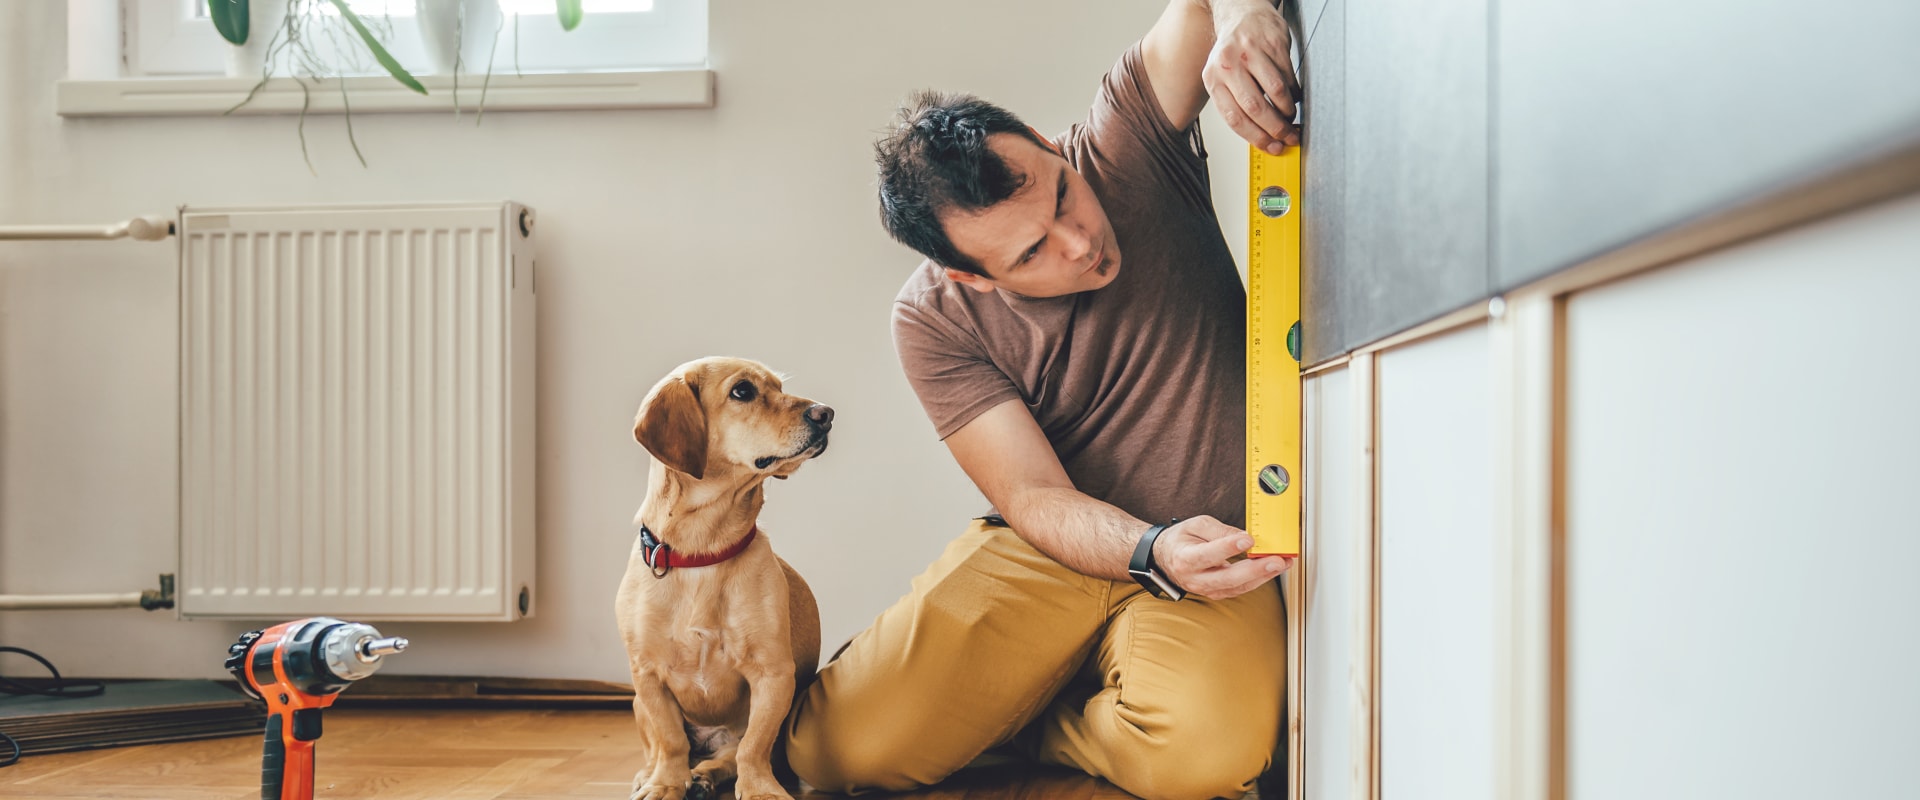 A Complete Guide to DIY Home Repairs